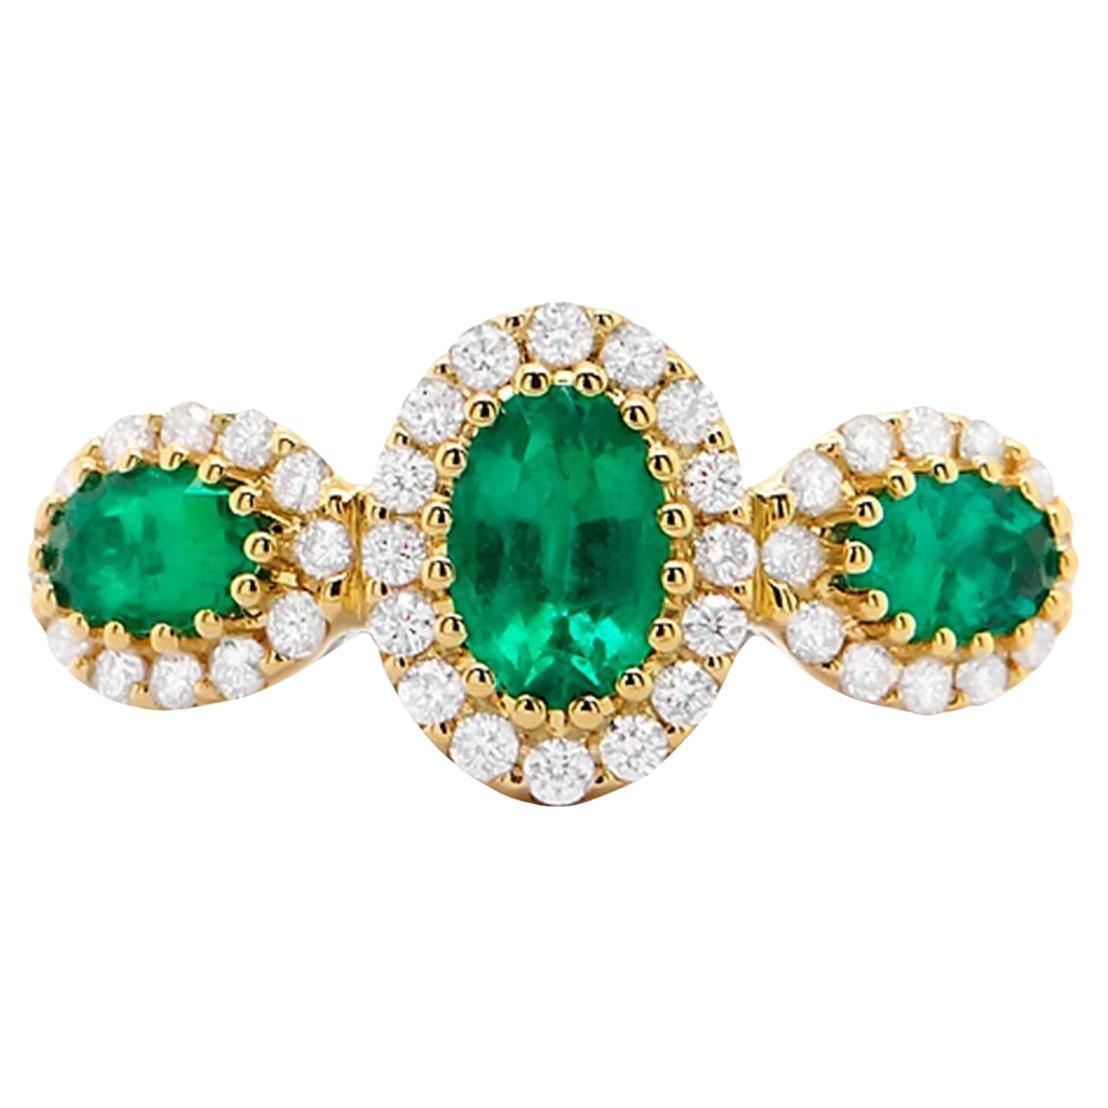 Emerald Ring With Diamonds 1.15 Carats 18K Gold